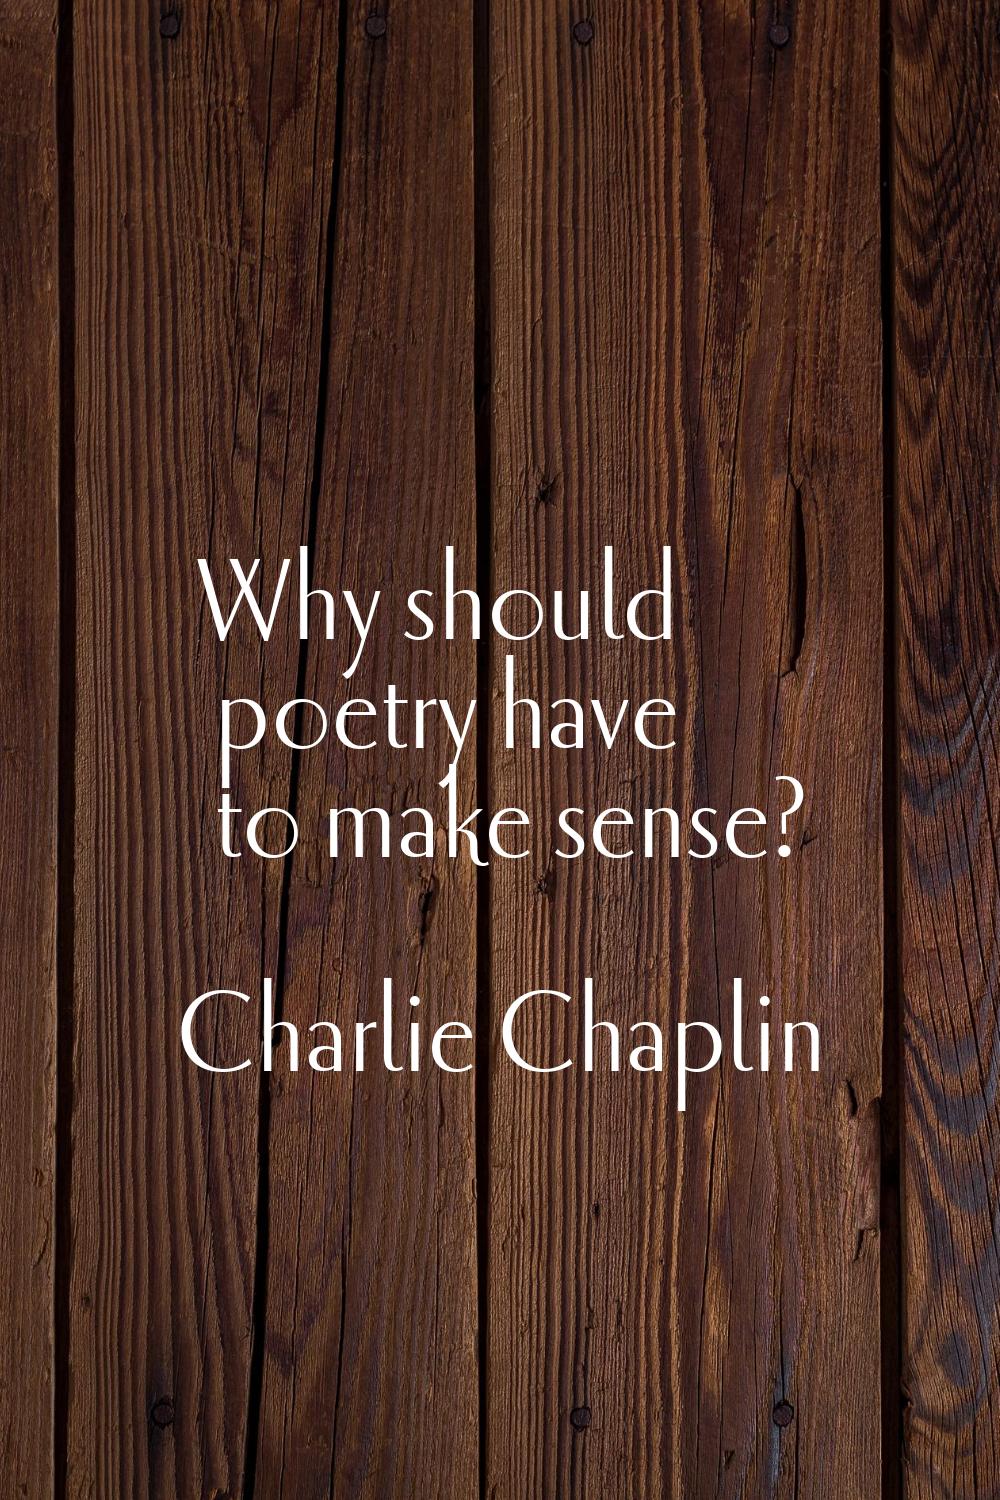 Why should poetry have to make sense?